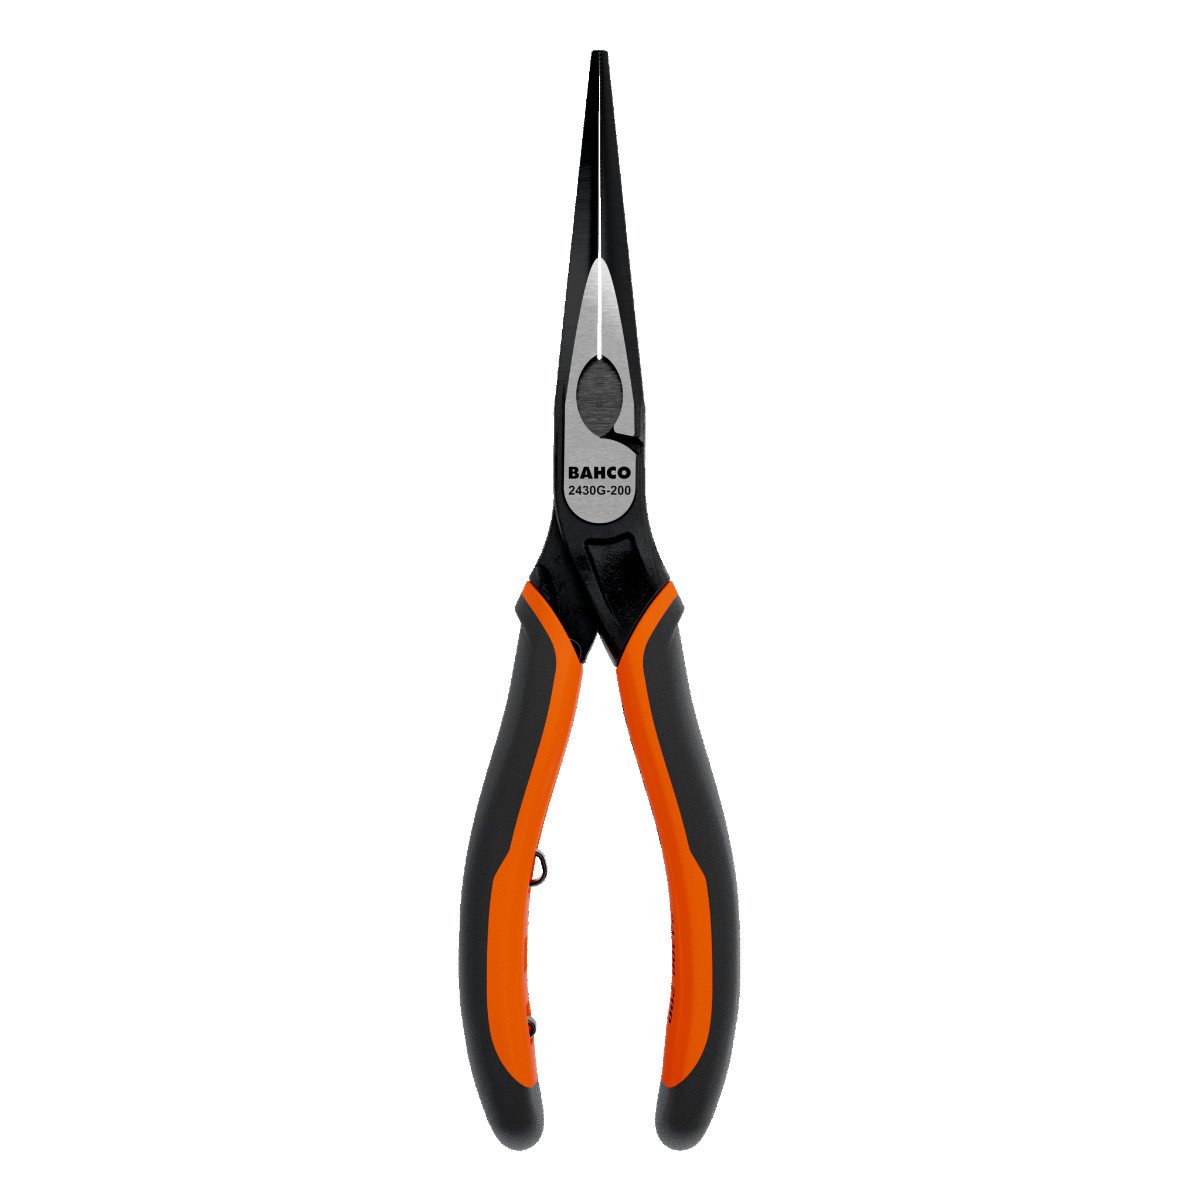 Bahco Bahco 21hdg 200 pliers with side Sharp Strong Type MM 